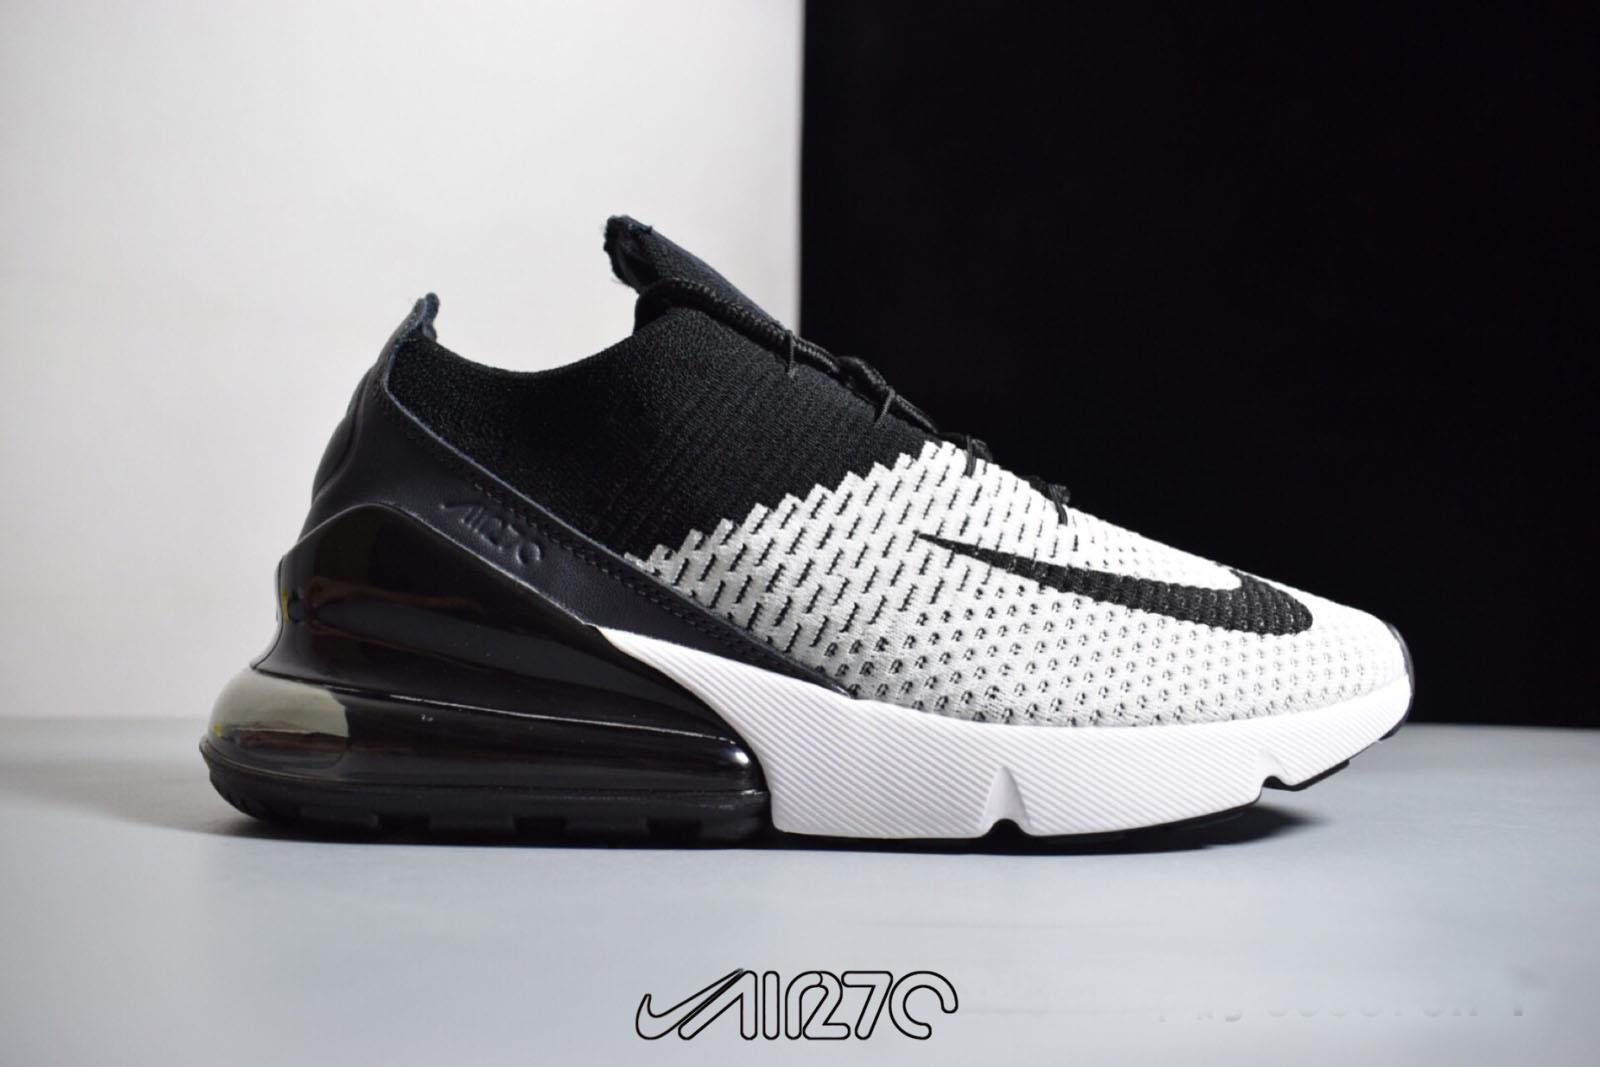 Nike Air Max 270 Flyknit White Black-Anthracite